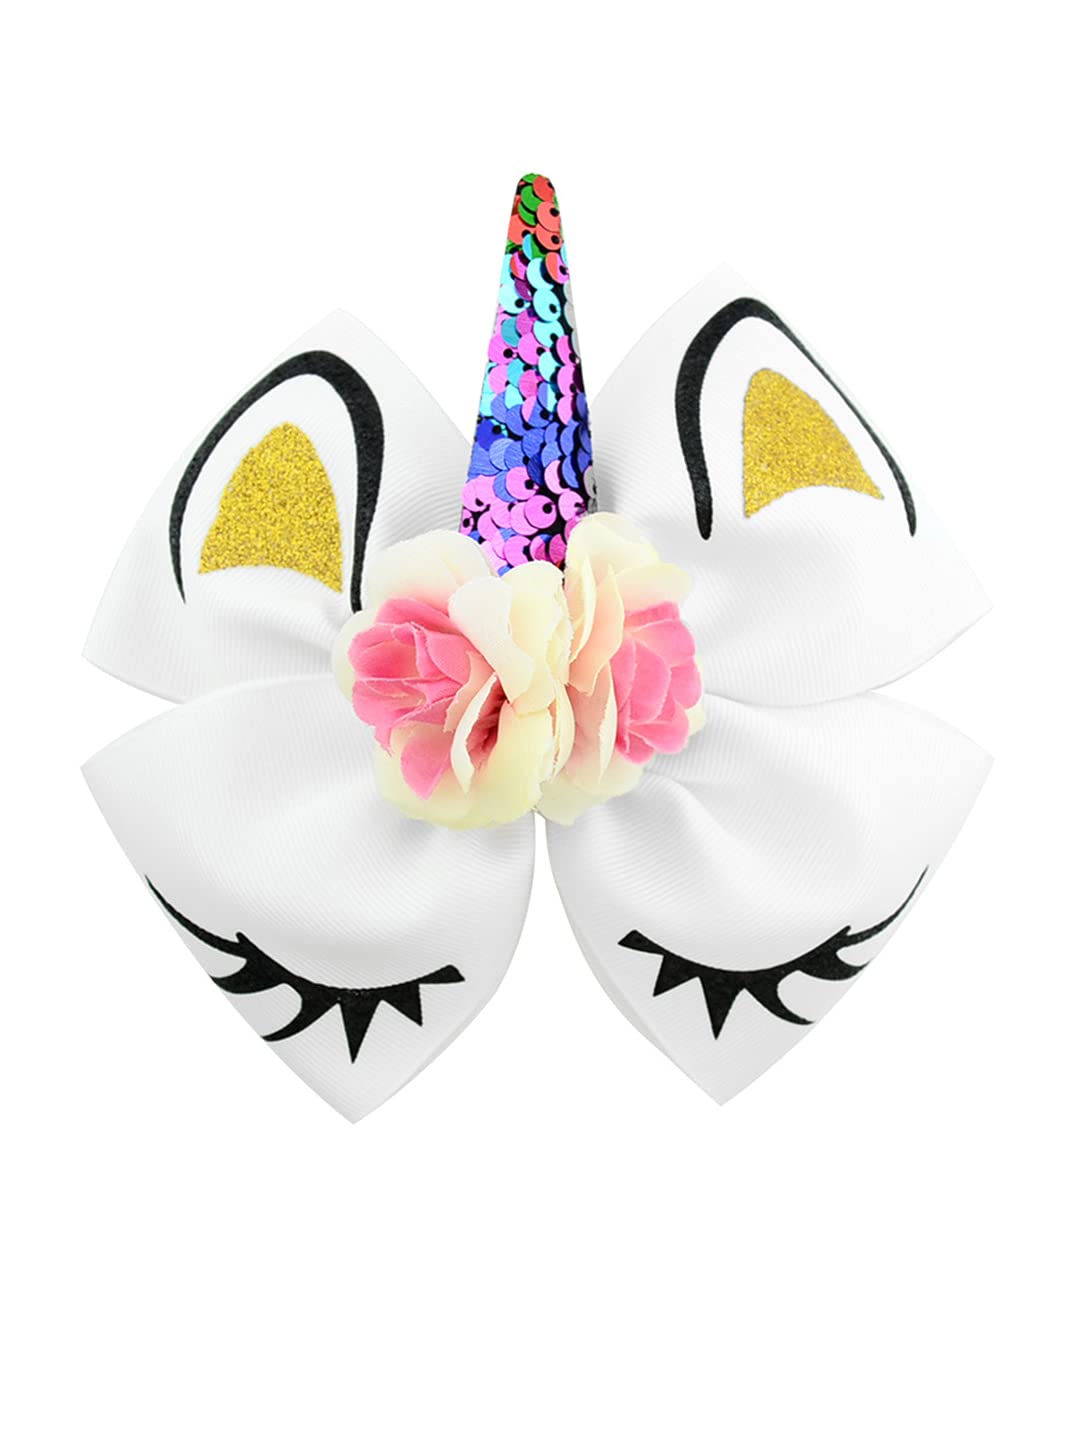 Melbees by Yellow Chimes Set of 2 Pcs Big Unicorn and Bow Shape Big Hair Clips Hair Acessories for Girls and Kids (Pack of 2), Multi-Color, Medium (YCHACL-KD014-MC)